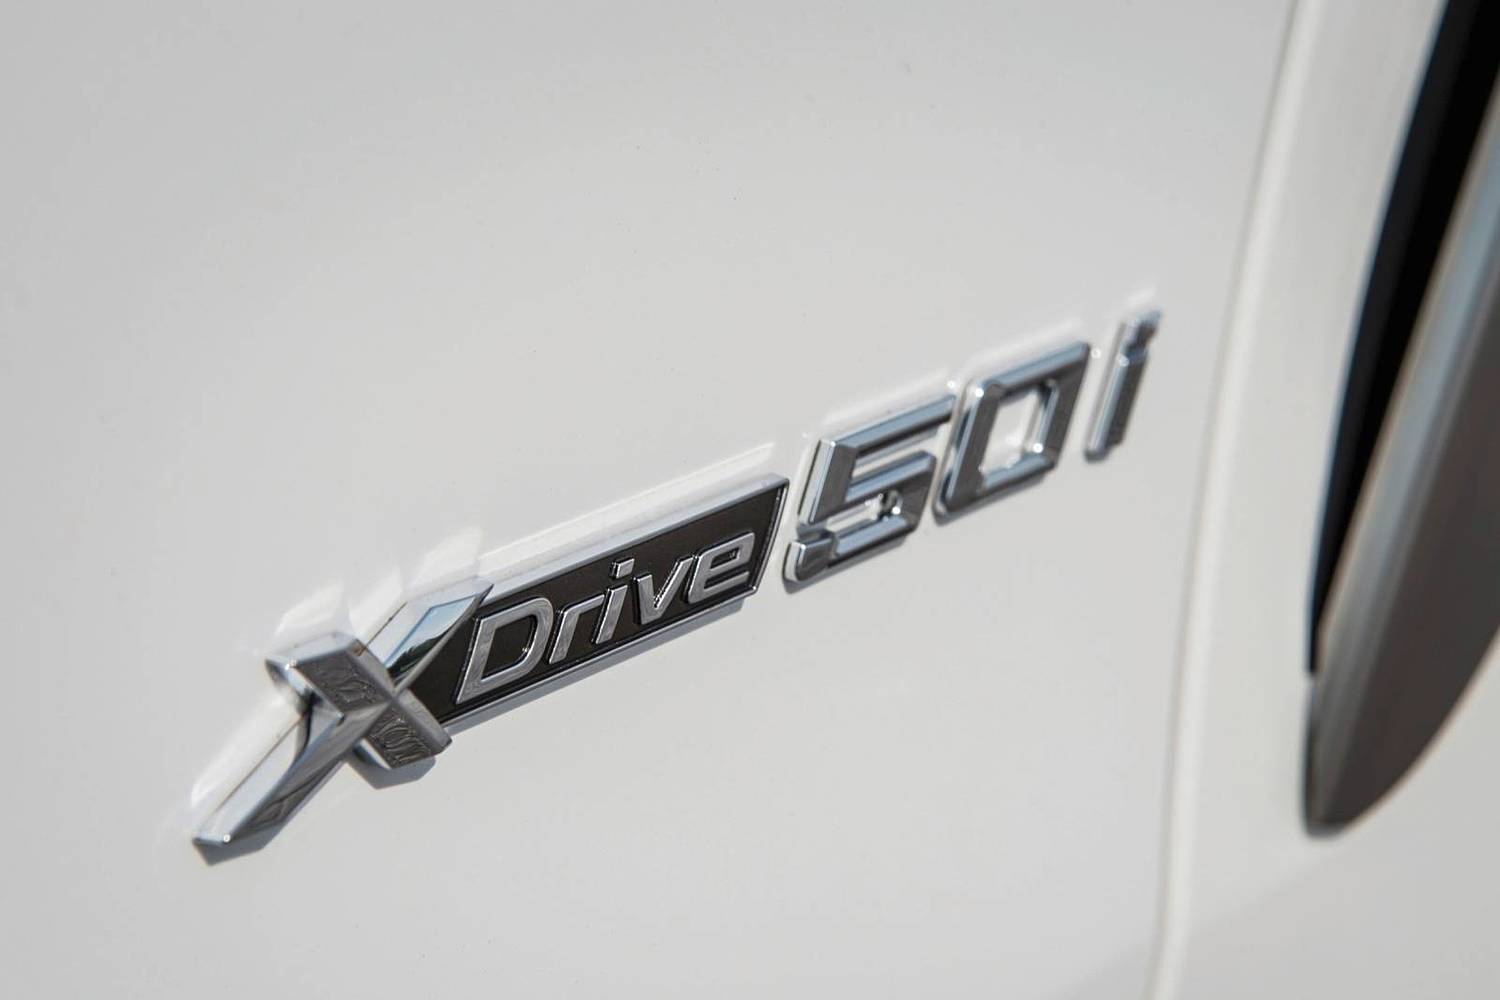 BMW X6 xDrive50i 4dr SUV Front Badge (2016 model year shown)